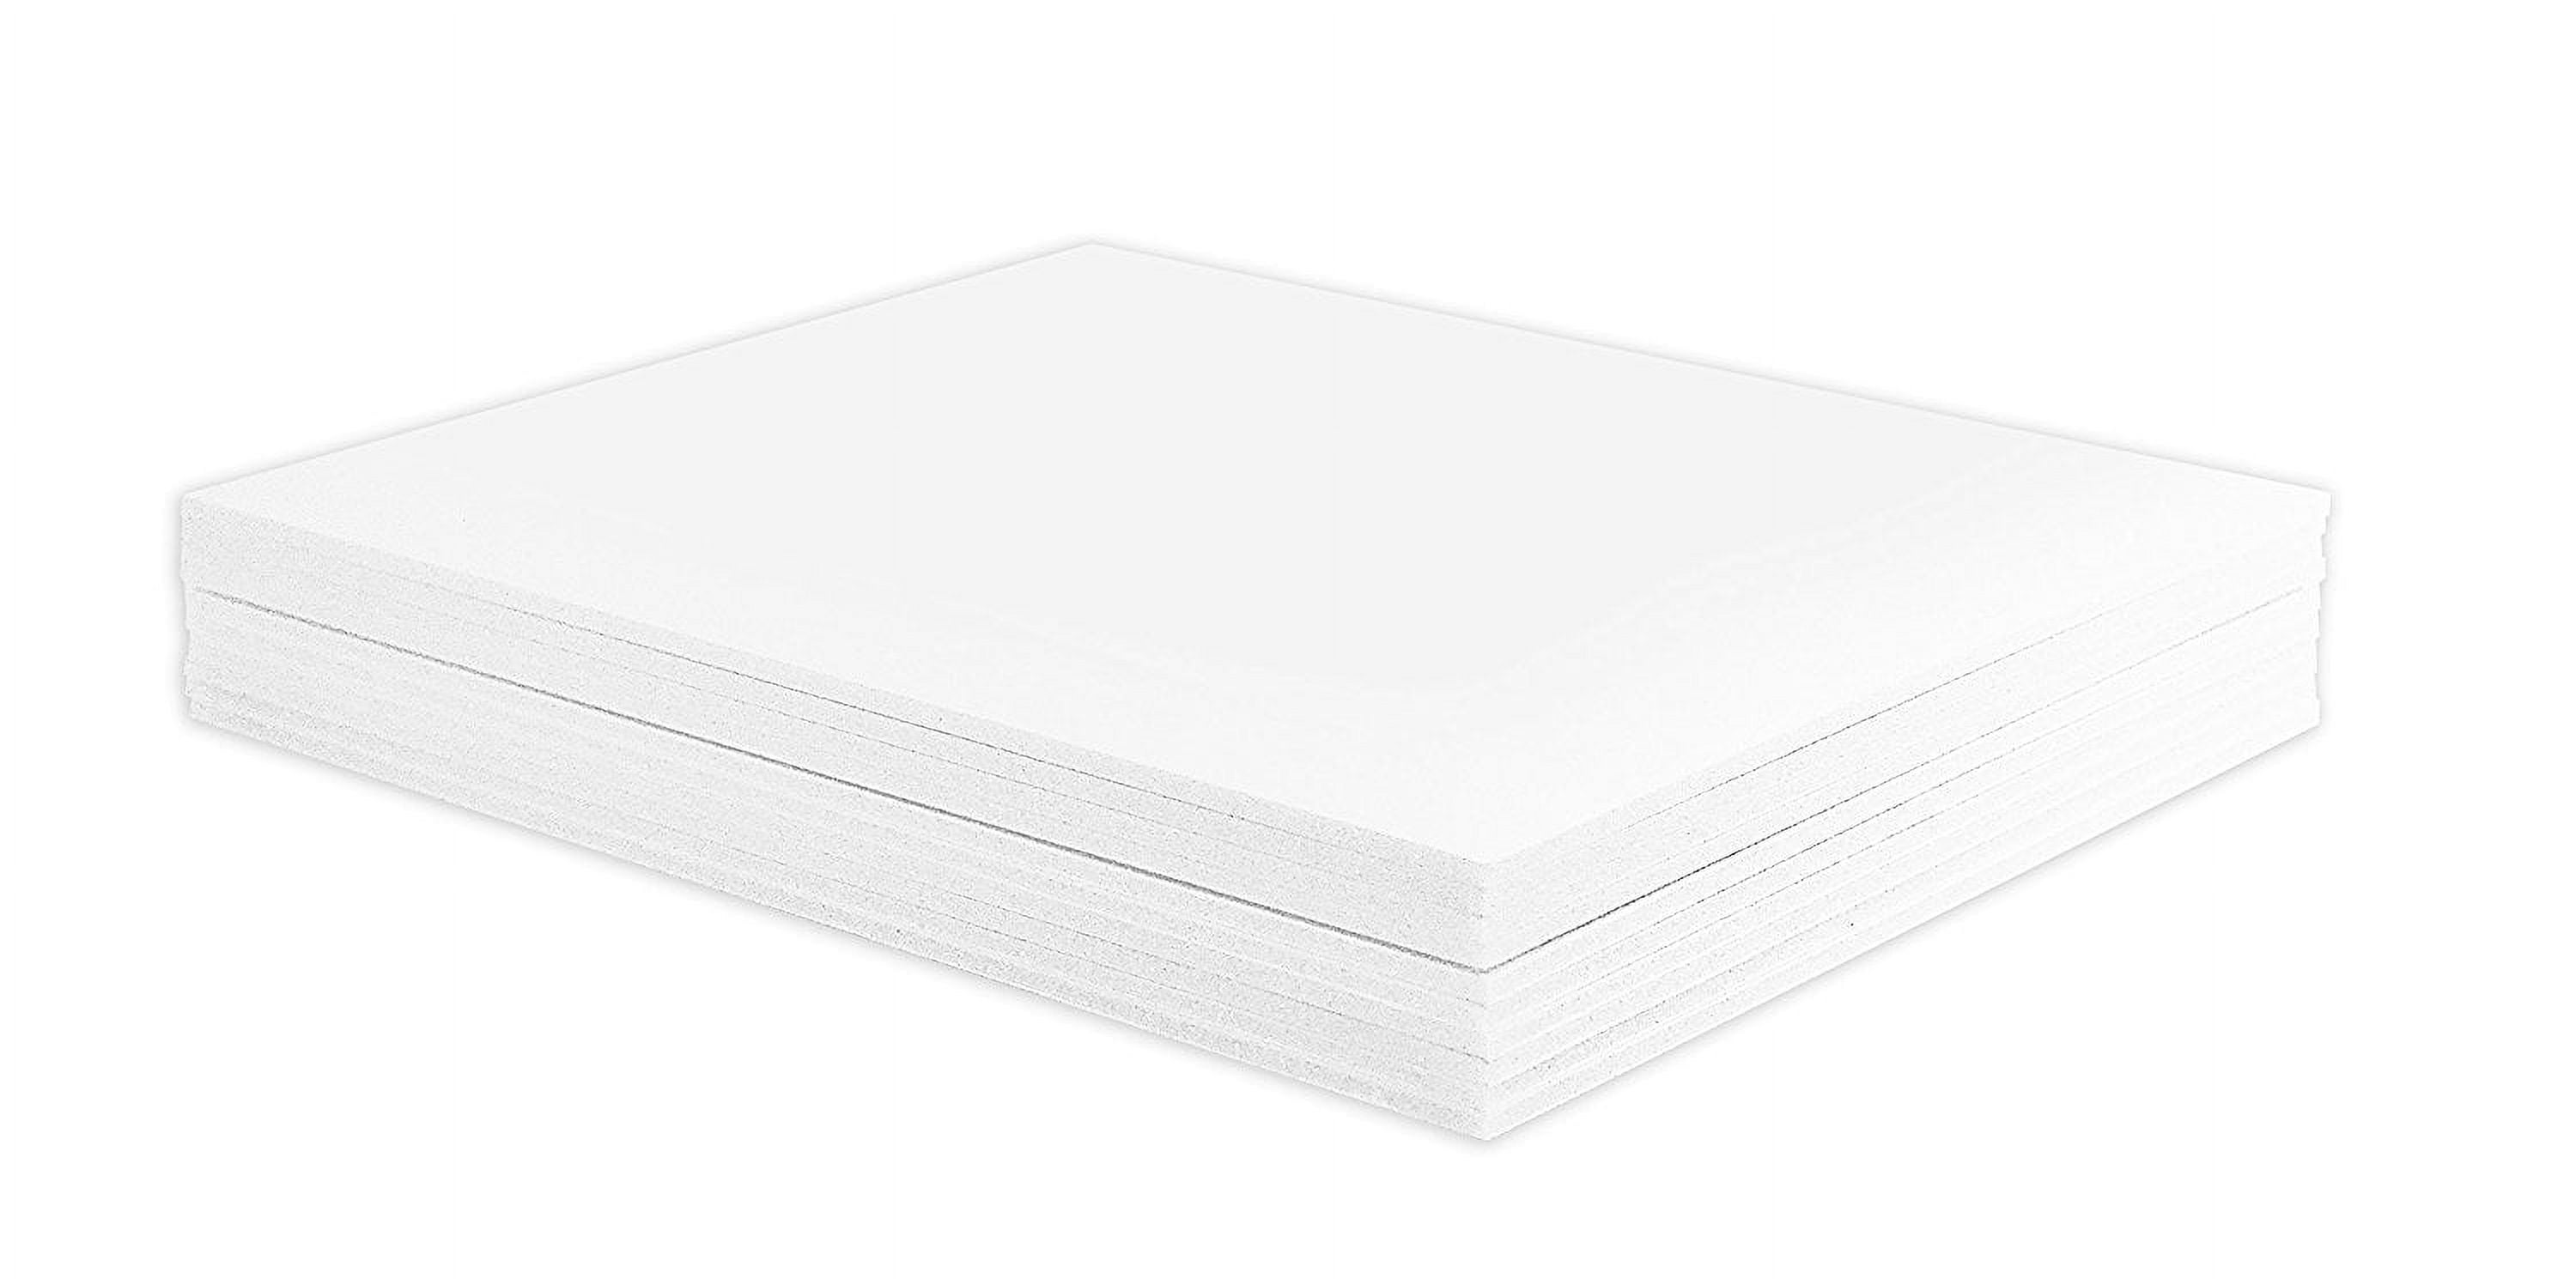 Mat Board Center, 50 Pieces 8x8 White Uncut Mat Boards Backing Boards -  Full Sheet - Great for Pictures, Frames, Crafts and More